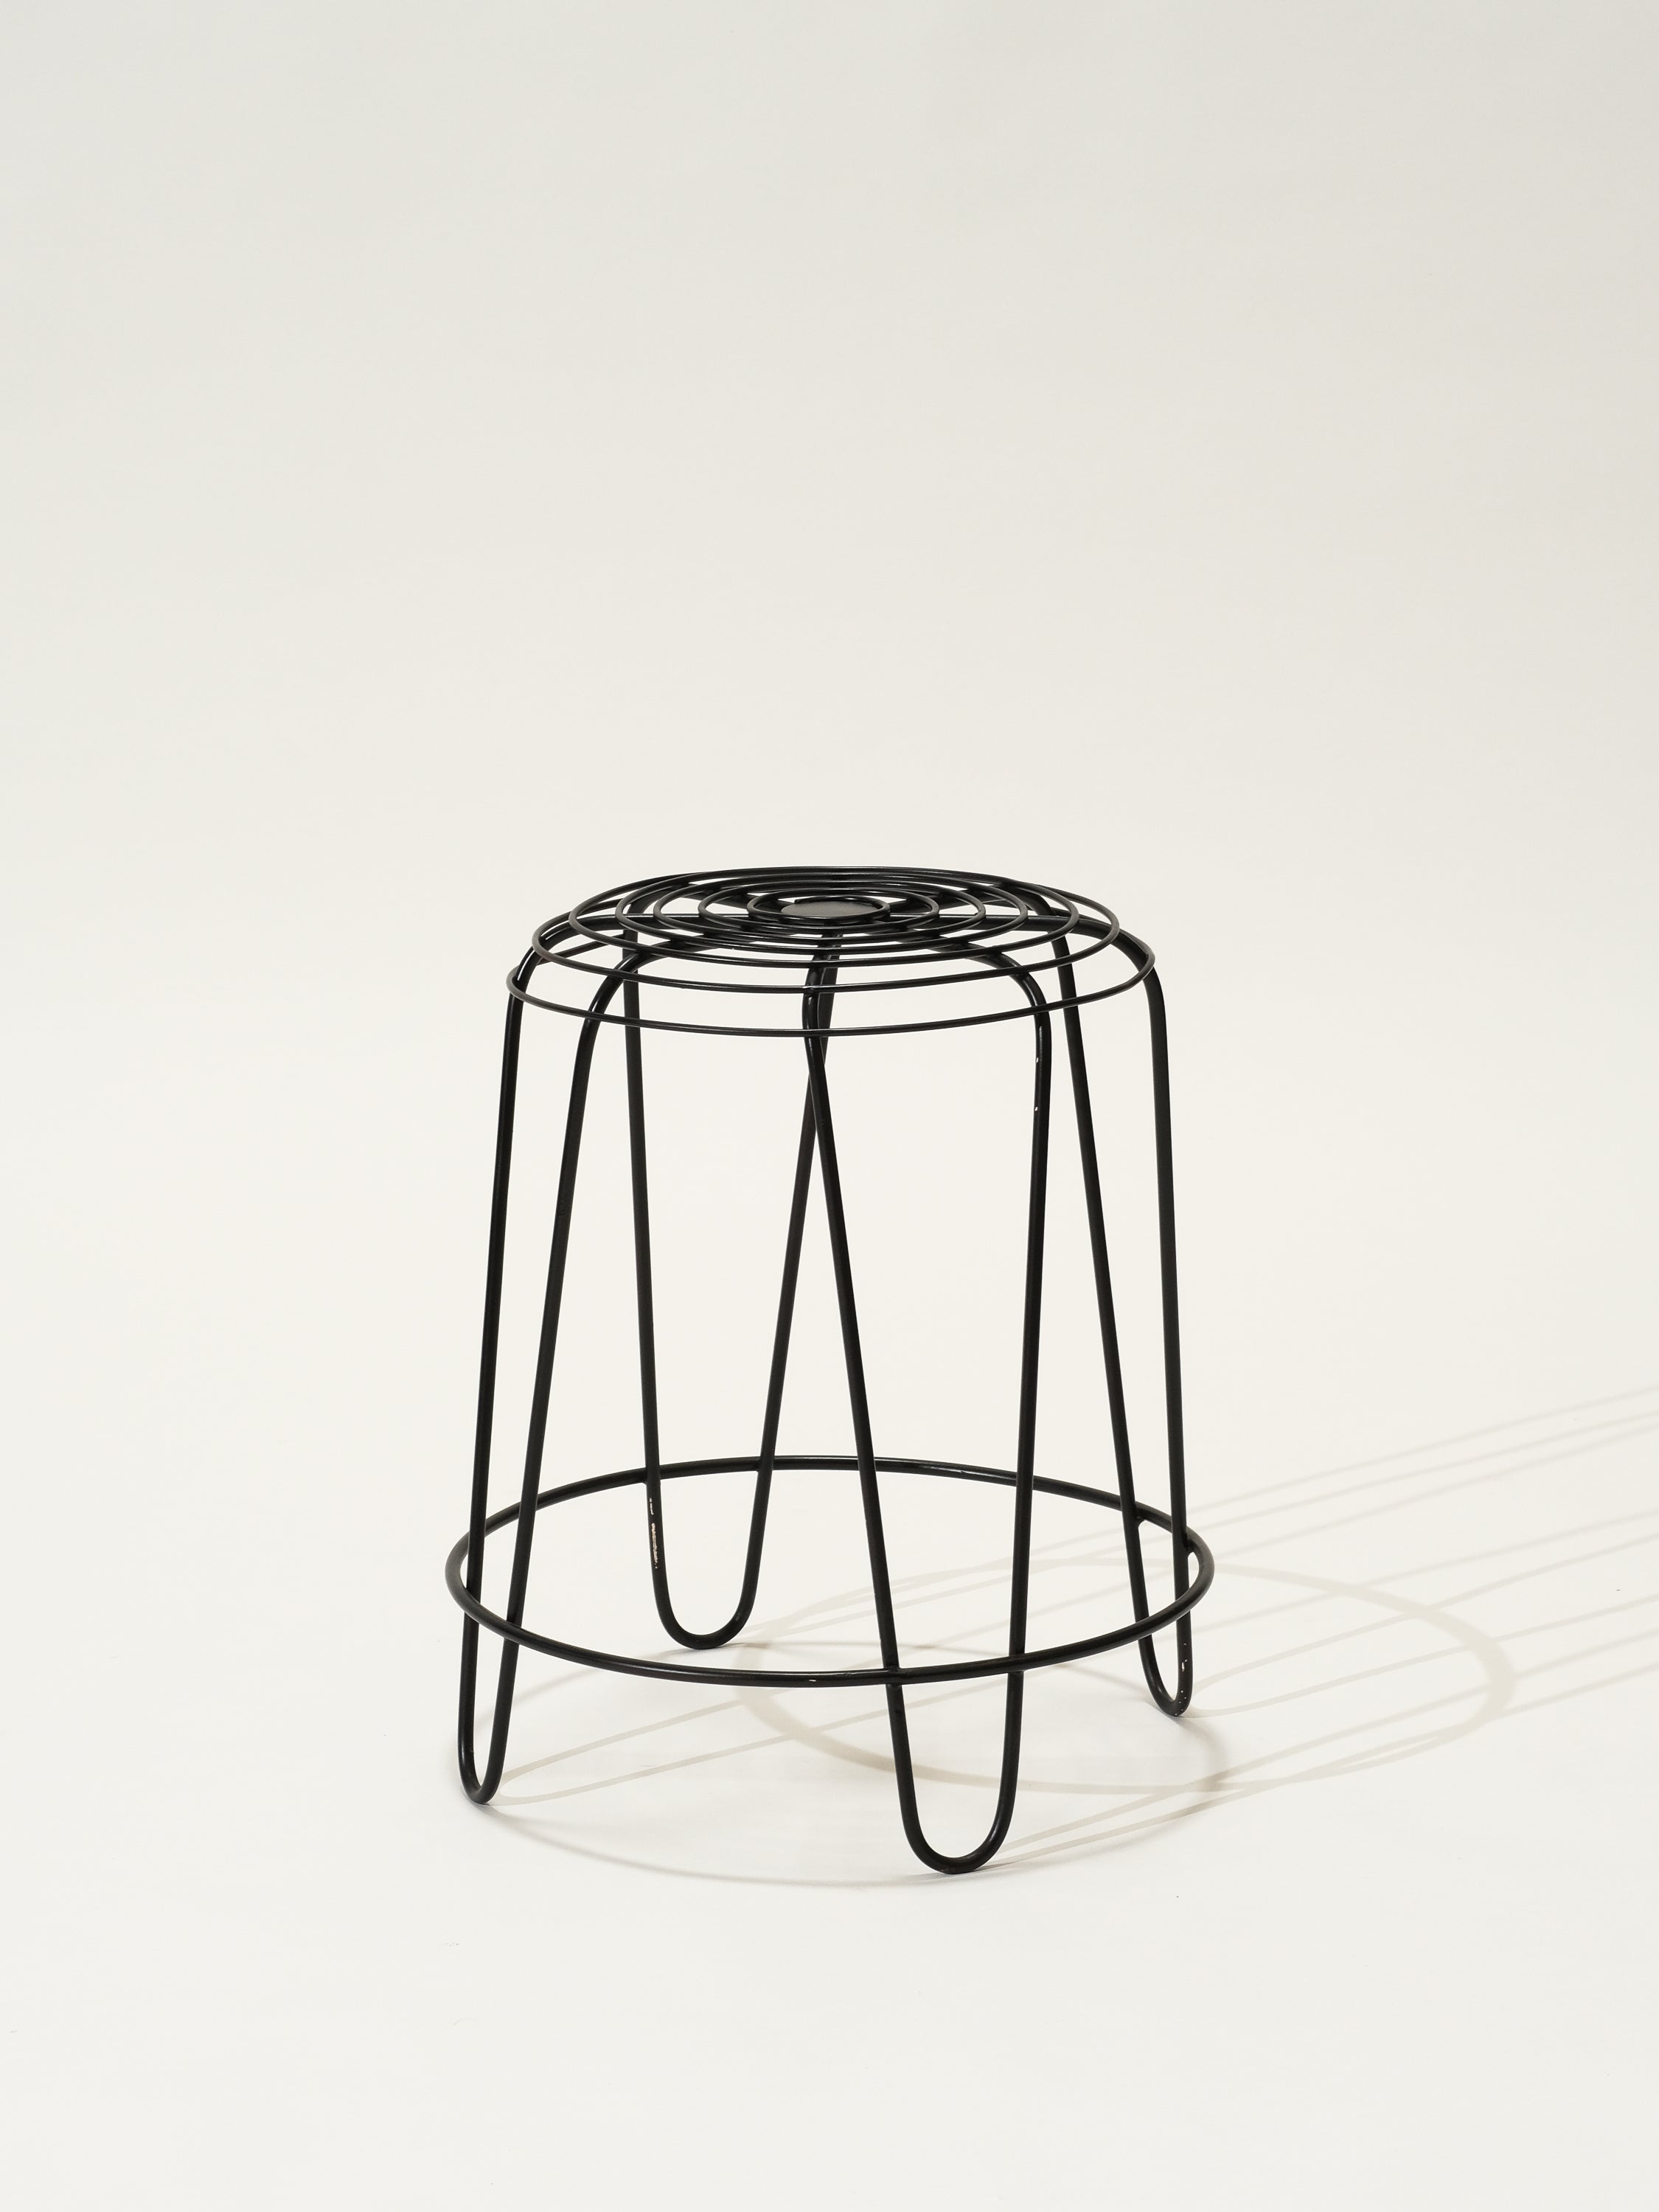 A Tempo Stool, Pauline Deltour for Alessi